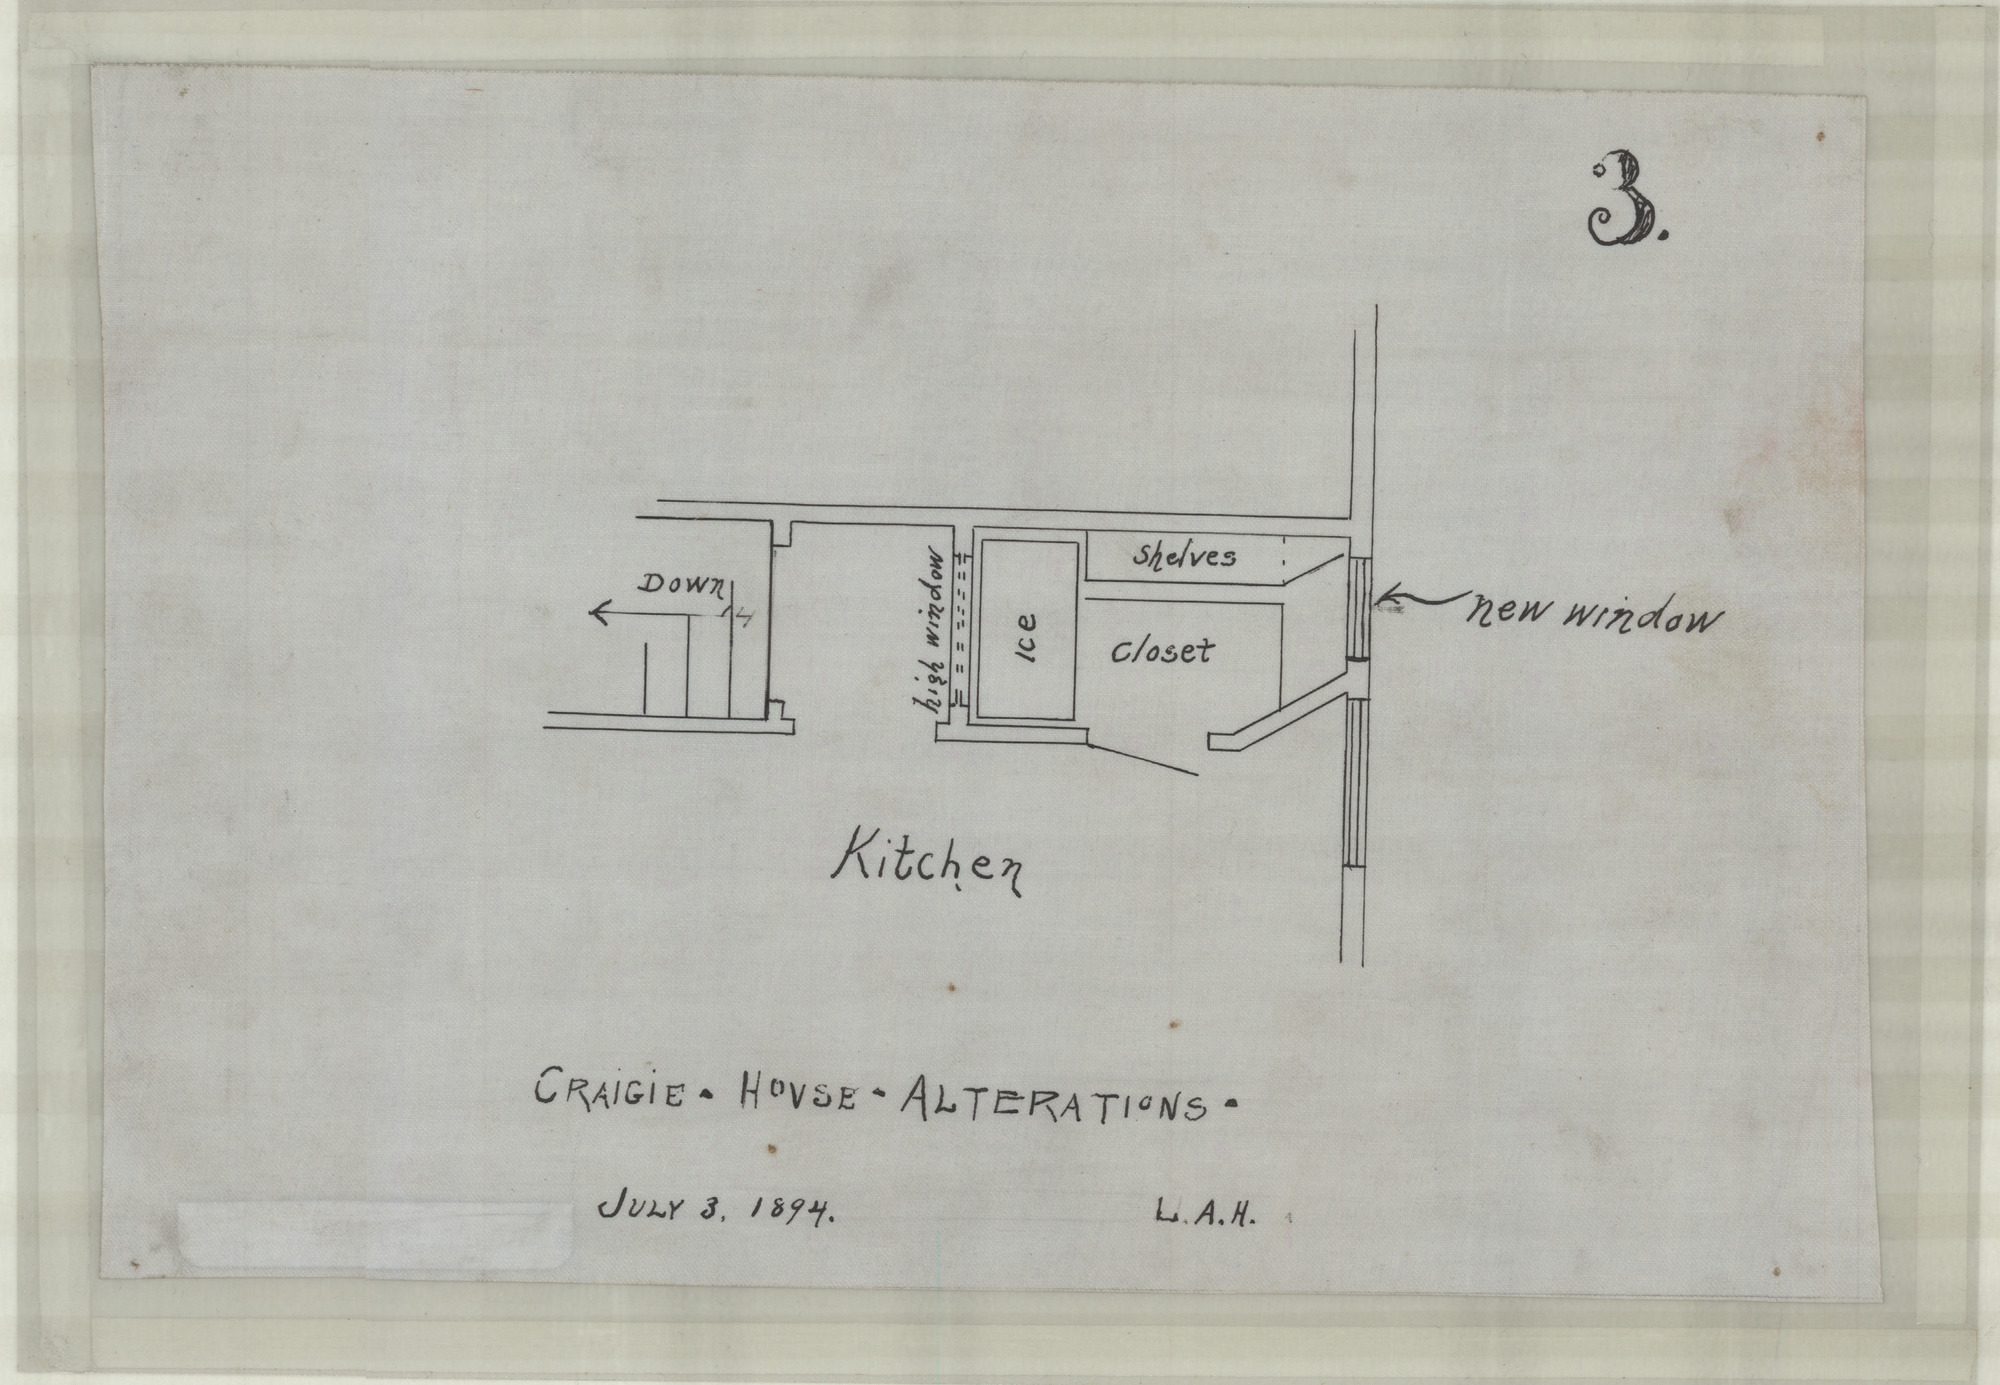 Small partial drawing with kitchen specifications and a number "3." in top right corner